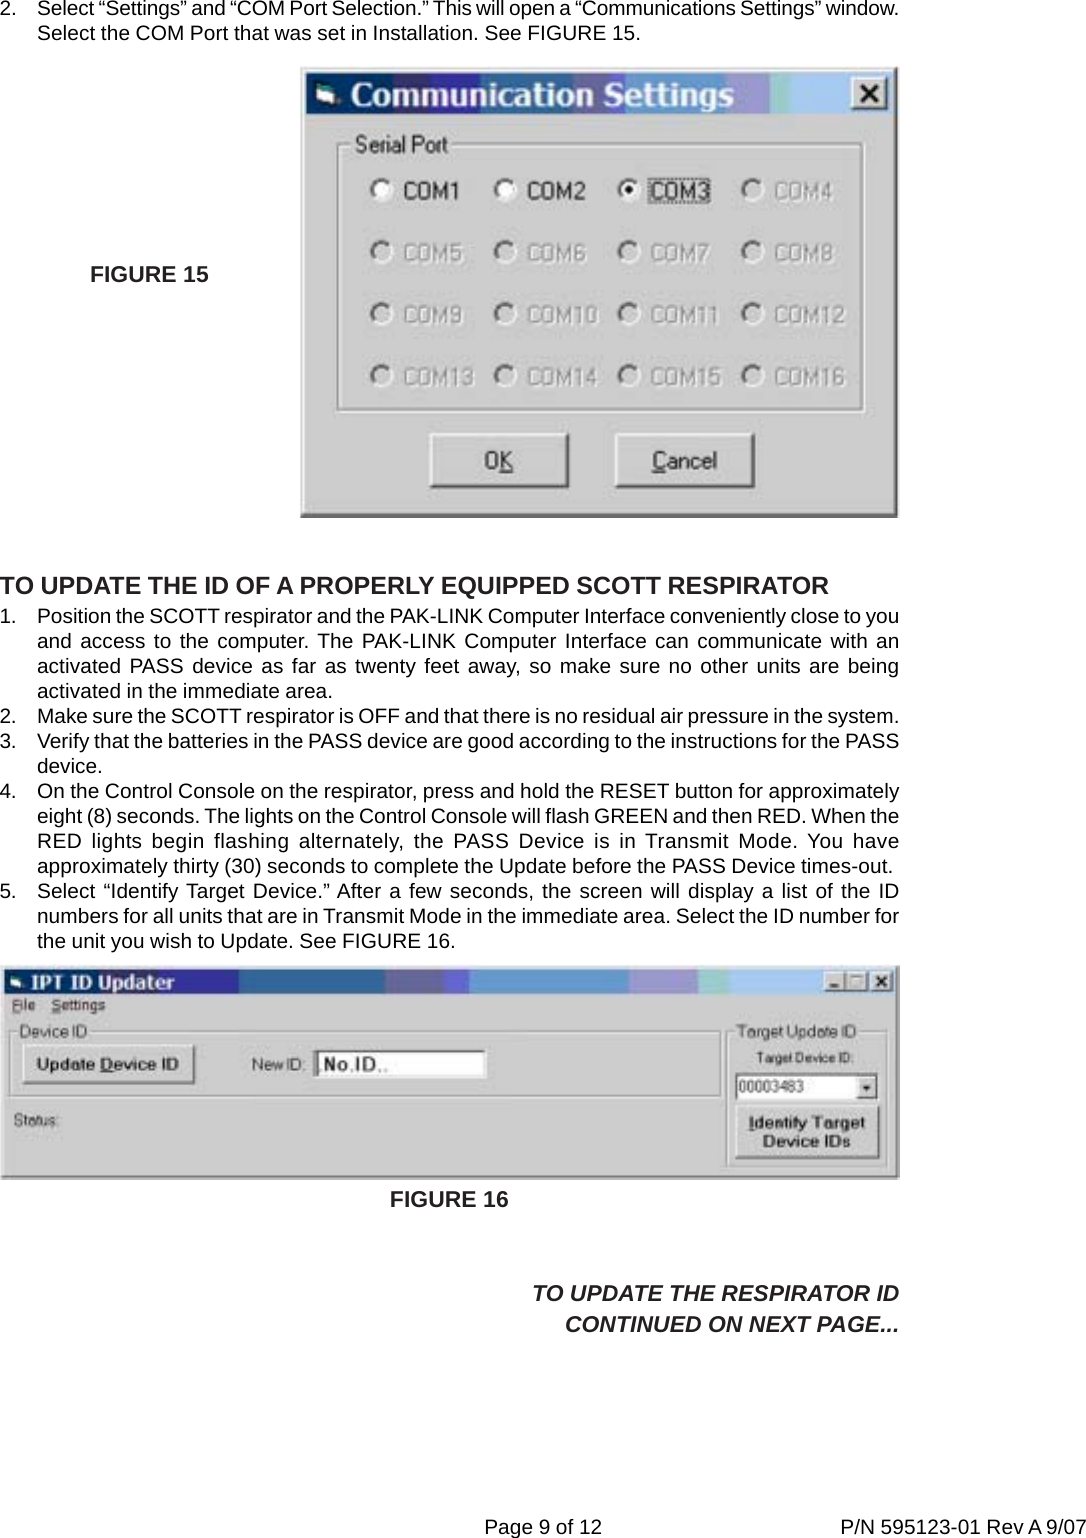 Page 9 of 12 P/N 595123-01 Rev A 9/072. Select “Settings” and “COM Port Selection.” This will open a “Communications Settings” window.Select the COM Port that was set in Installation. See FIGURE 15.TO UPDATE THE ID OF A PROPERLY EQUIPPED SCOTT RESPIRATOR1. Position the SCOTT respirator and the PAK-LINK Computer Interface conveniently close to youand access to the computer. The PAK-LINK Computer Interface can communicate with anactivated PASS device as far as twenty feet away, so make sure no other units are beingactivated in the immediate area.2. Make sure the SCOTT respirator is OFF and that there is no residual air pressure in the system.3. Verify that the batteries in the PASS device are good according to the instructions for the PASSdevice.4. On the Control Console on the respirator, press and hold the RESET button for approximatelyeight (8) seconds. The lights on the Control Console will flash GREEN and then RED. When theRED lights begin flashing alternately, the PASS Device is in Transmit Mode. You haveapproximately thirty (30) seconds to complete the Update before the PASS Device times-out.5. Select “Identify Target Device.” After a few seconds, the screen will display a list of the IDnumbers for all units that are in Transmit Mode in the immediate area. Select the ID number forthe unit you wish to Update. See FIGURE 16.FIGURE 15TO UPDATE THE RESPIRATOR IDCONTINUED ON NEXT PAGE...FIGURE 16